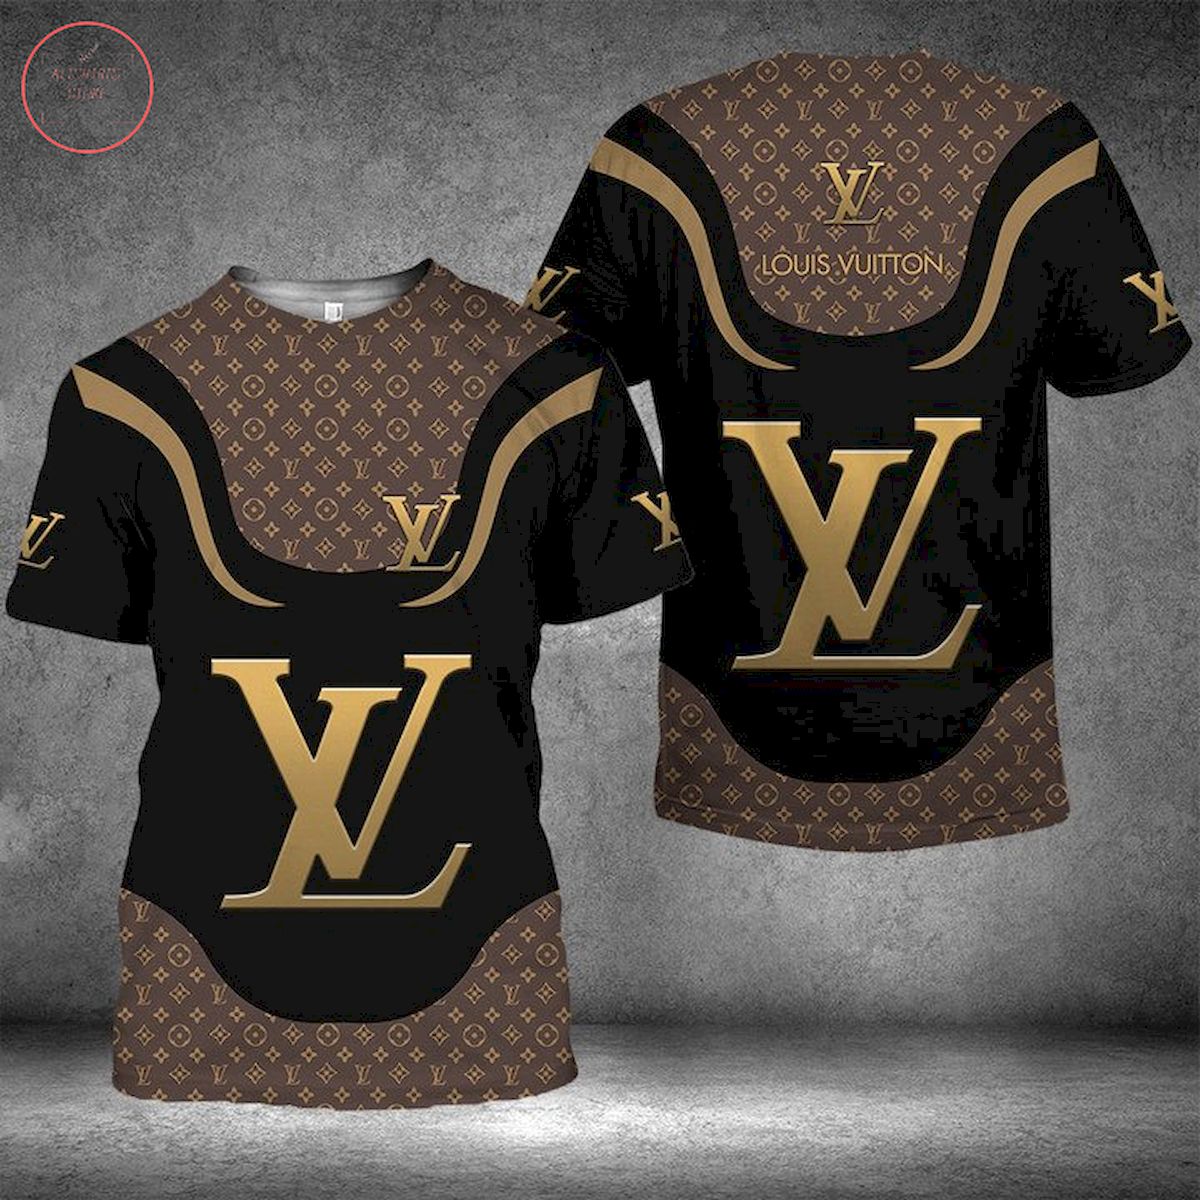 Louis Vuitton LV Luxury Brand All Over Printed Shirt